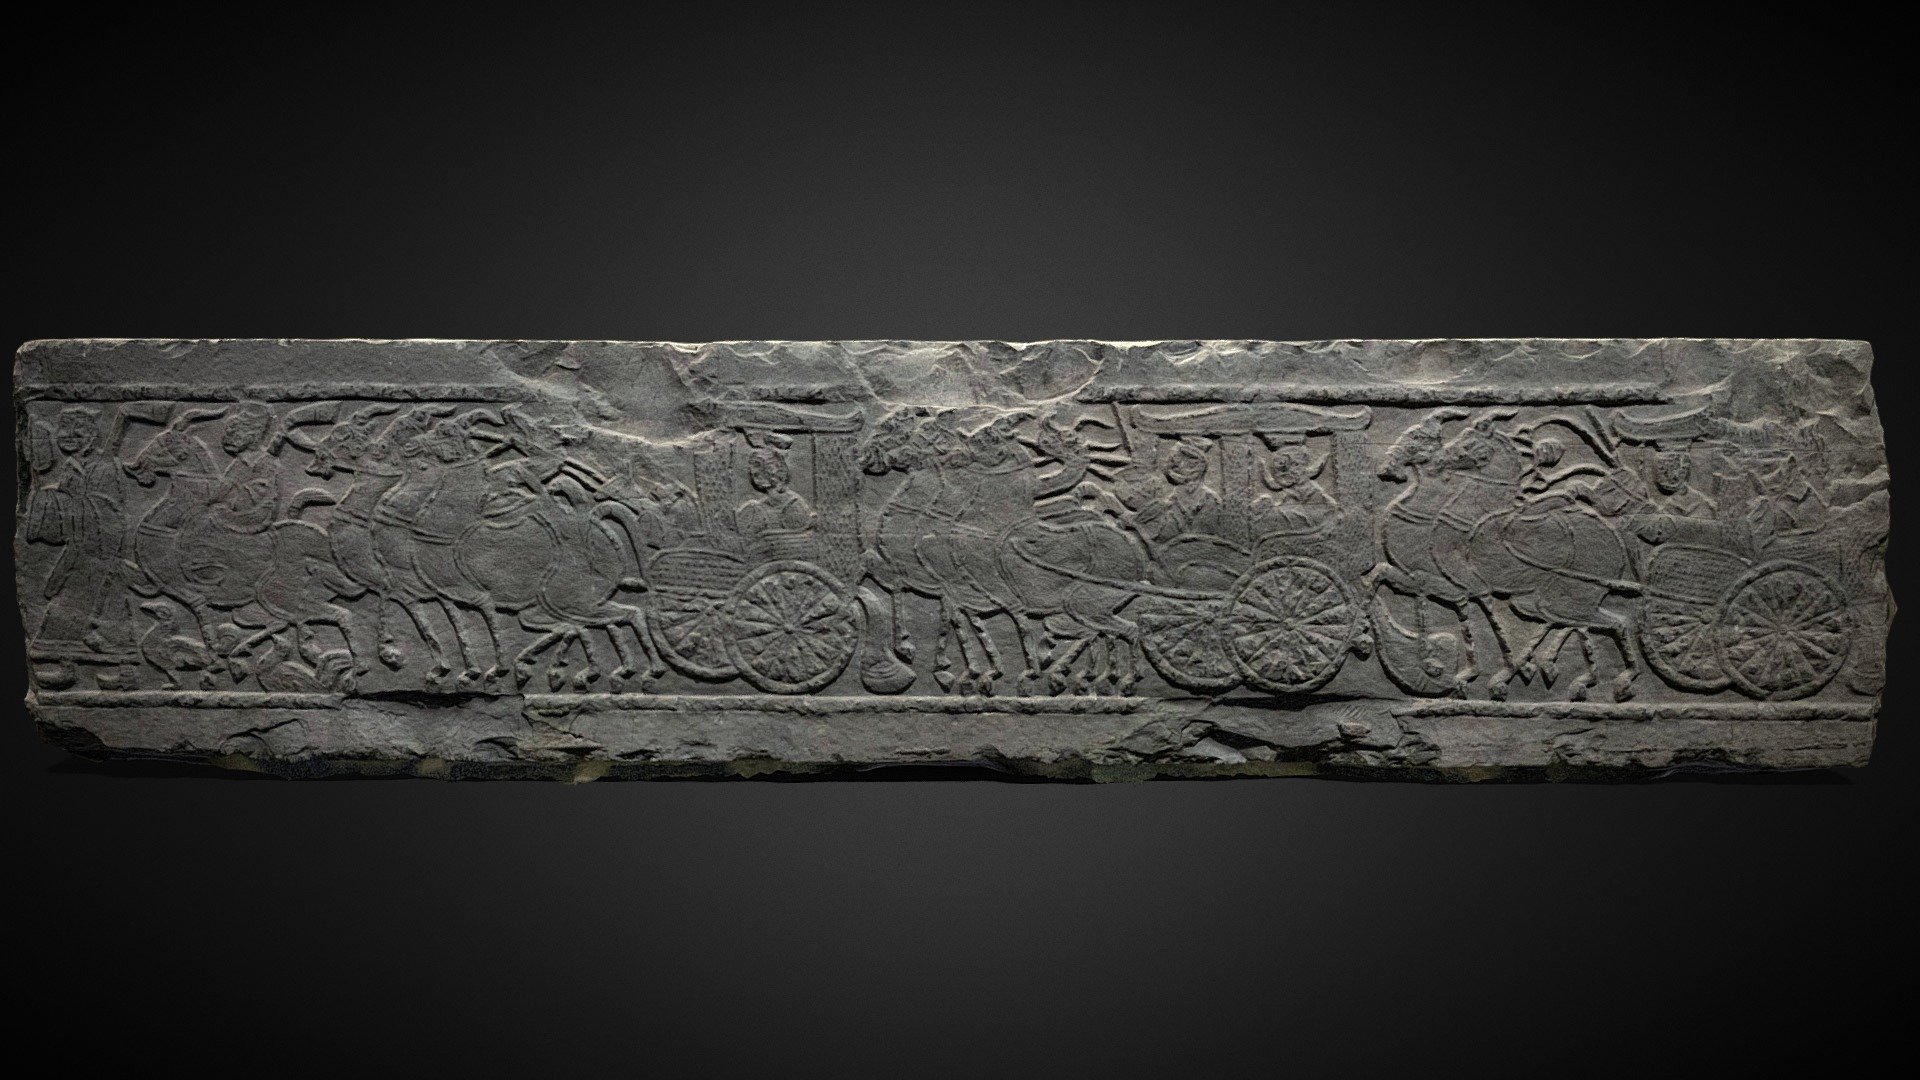 Stone relief of trip on carriage(车马出行图汉画像石，安徽博物院藏品）
东汉(25AD-220AD)
Unearthed in Shanzi, a tomb in Xiading Village, Chuchan Town, Suxian County, Anhui Province in 1956 - Stone relief of trip on carriage - 3D model by Tigershill (@tigerofchen) 3d model